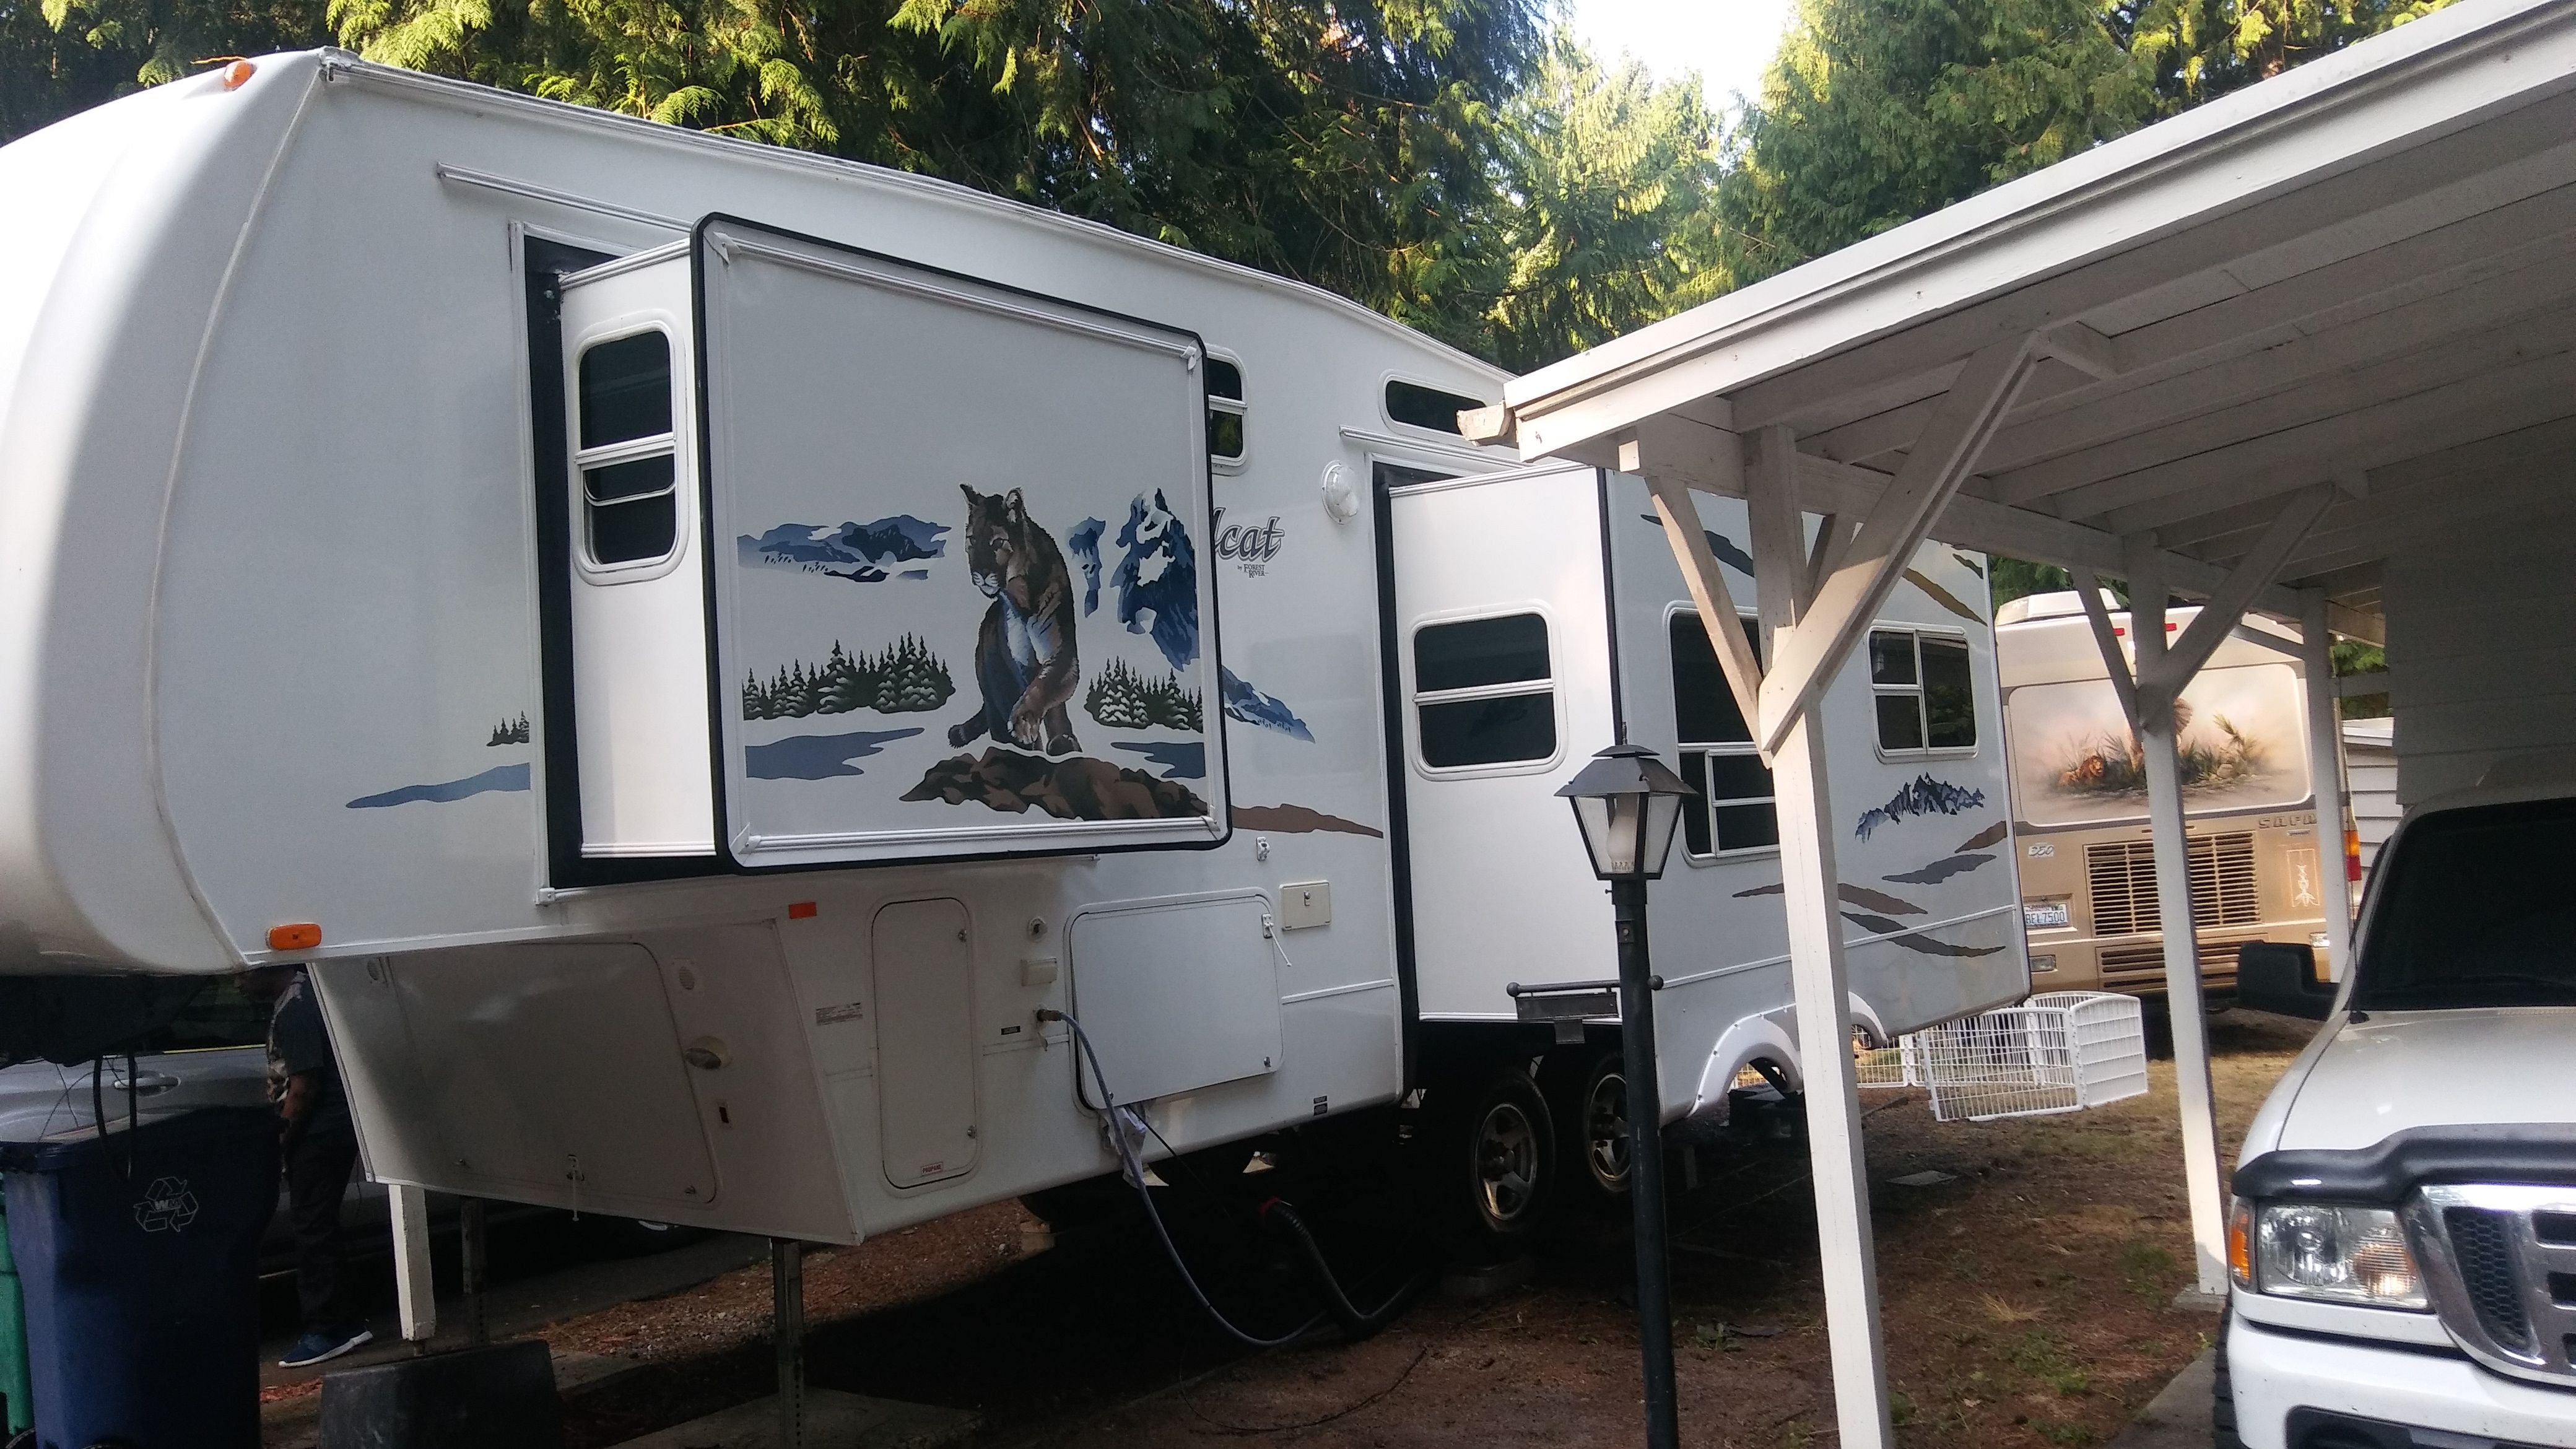 Sold, RV, 2006 Wildcat by Forest River, 5th Wheel, 30ft. L